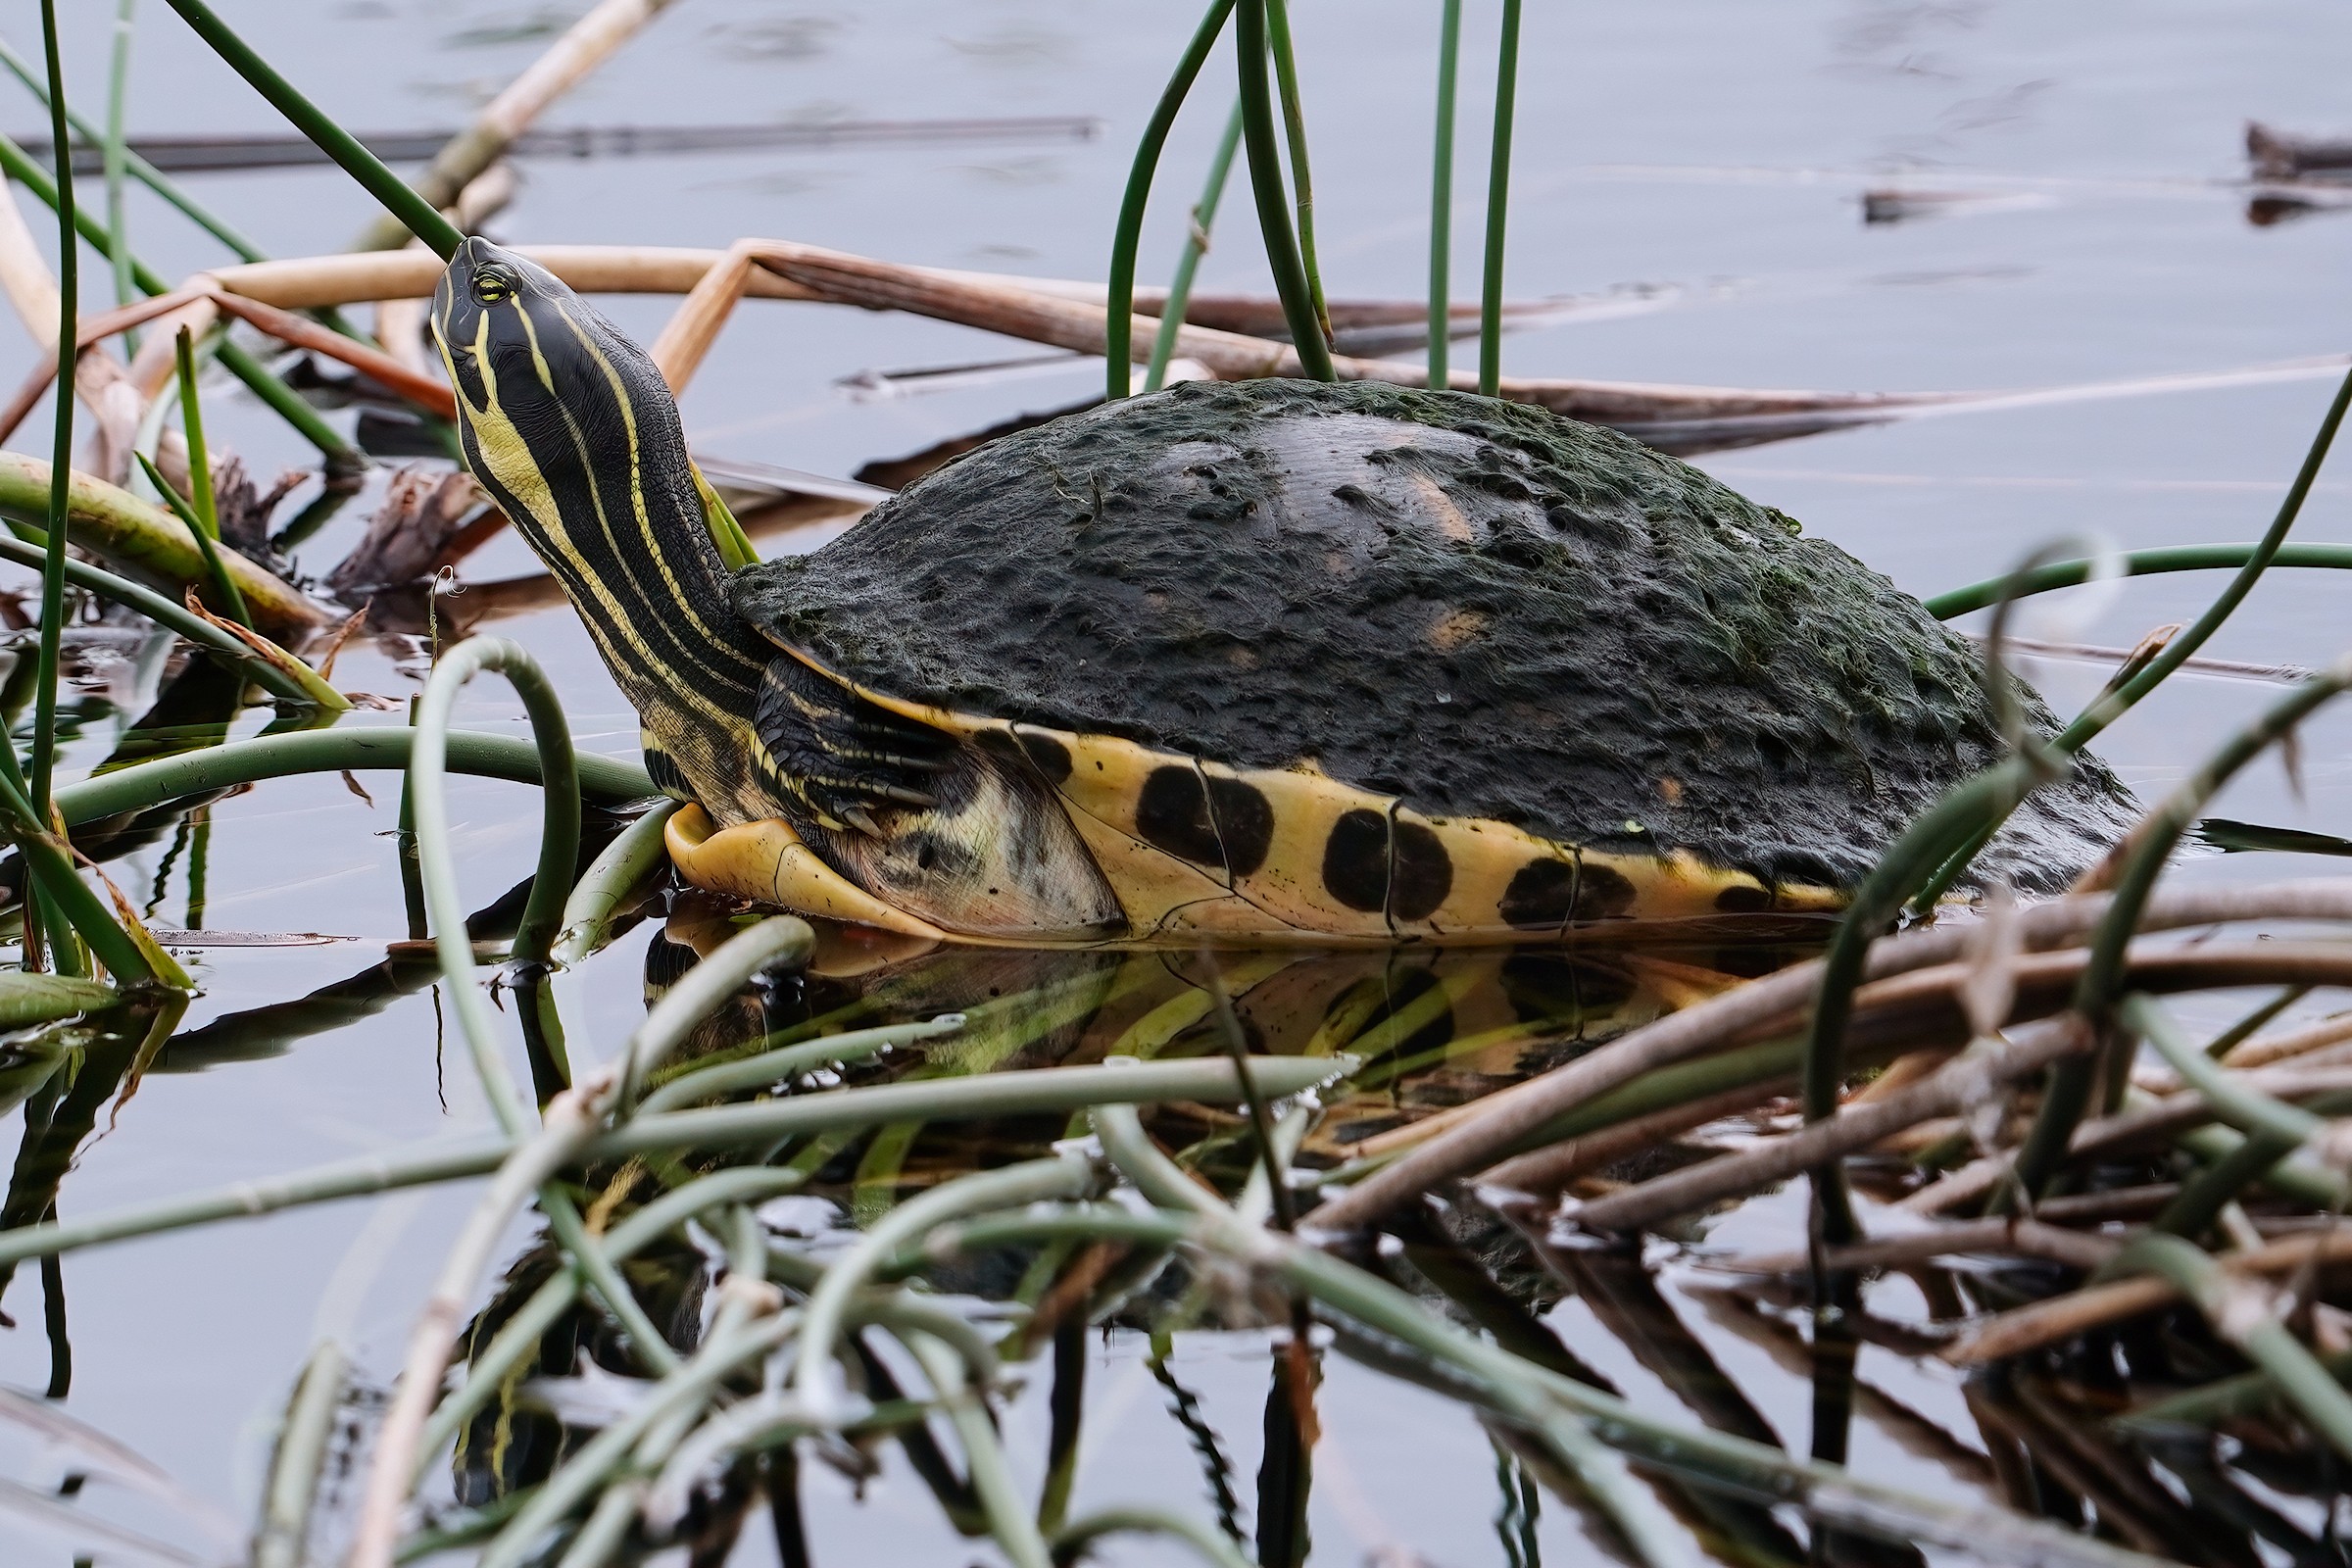 Florida cooter turtle